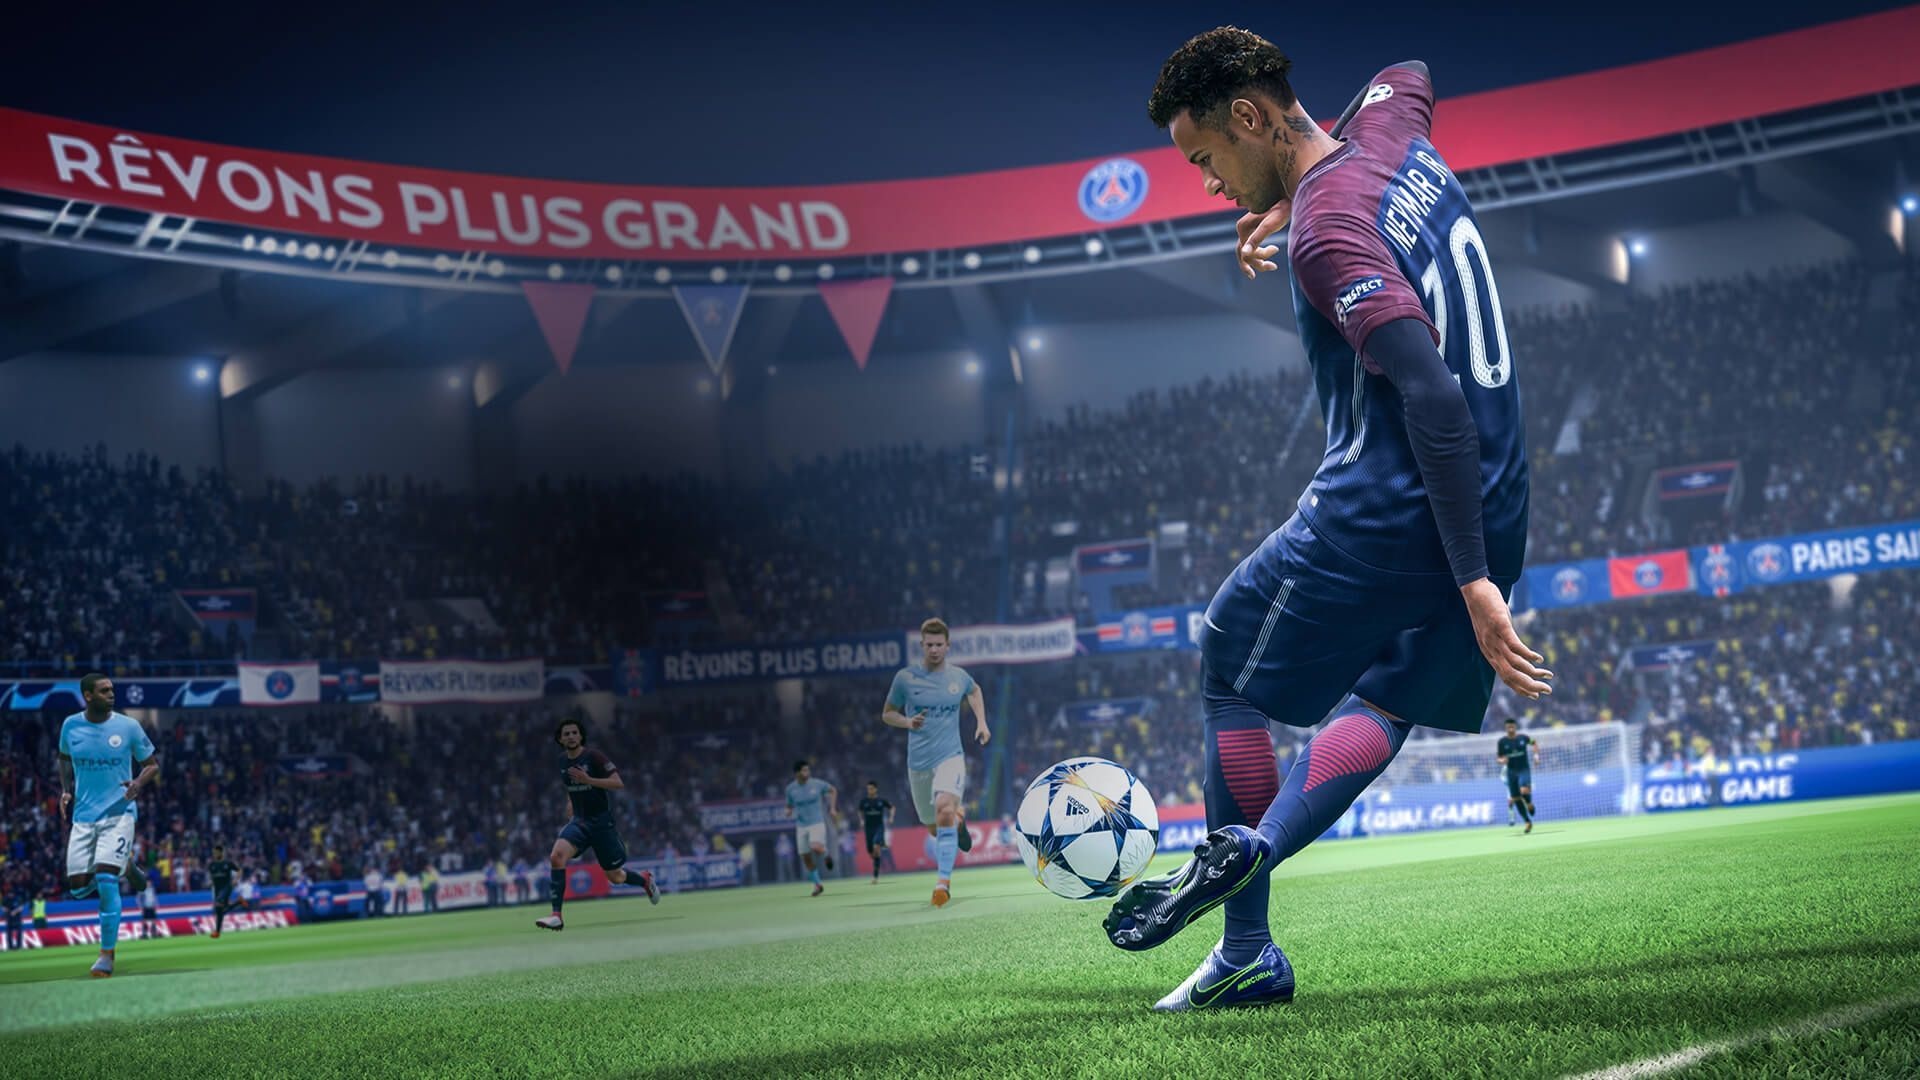 FIFA Soccer (Game): The 26th installment, 2019, Gameplay changes: “Active Touch System”. 1920x1080 Full HD Wallpaper.